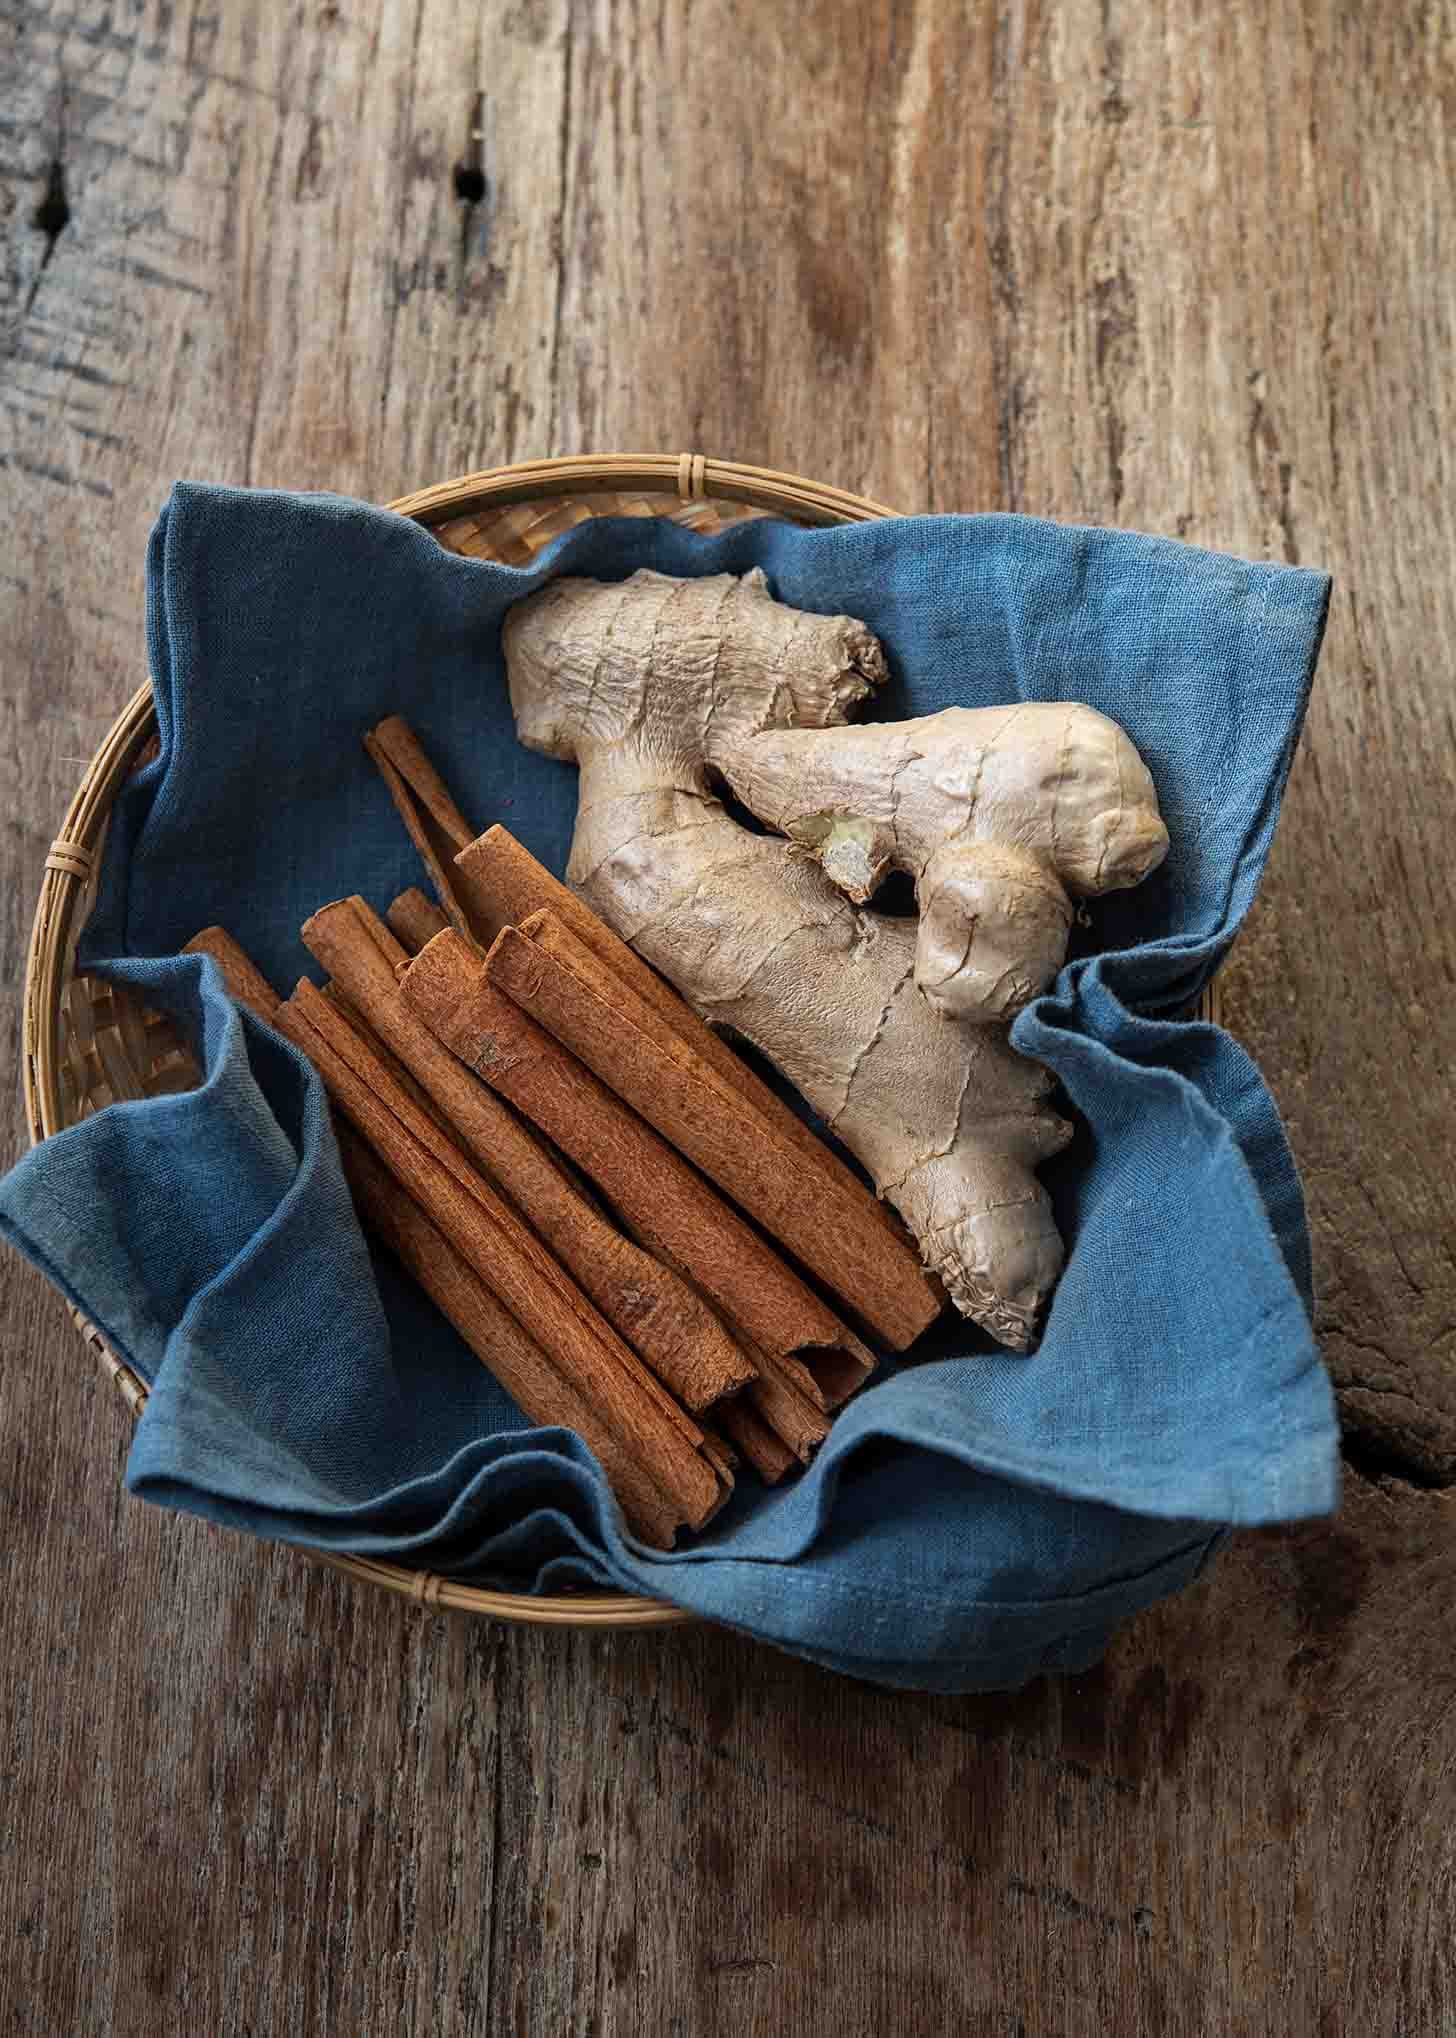 Cinnamon sticks and ginger root in a basket.